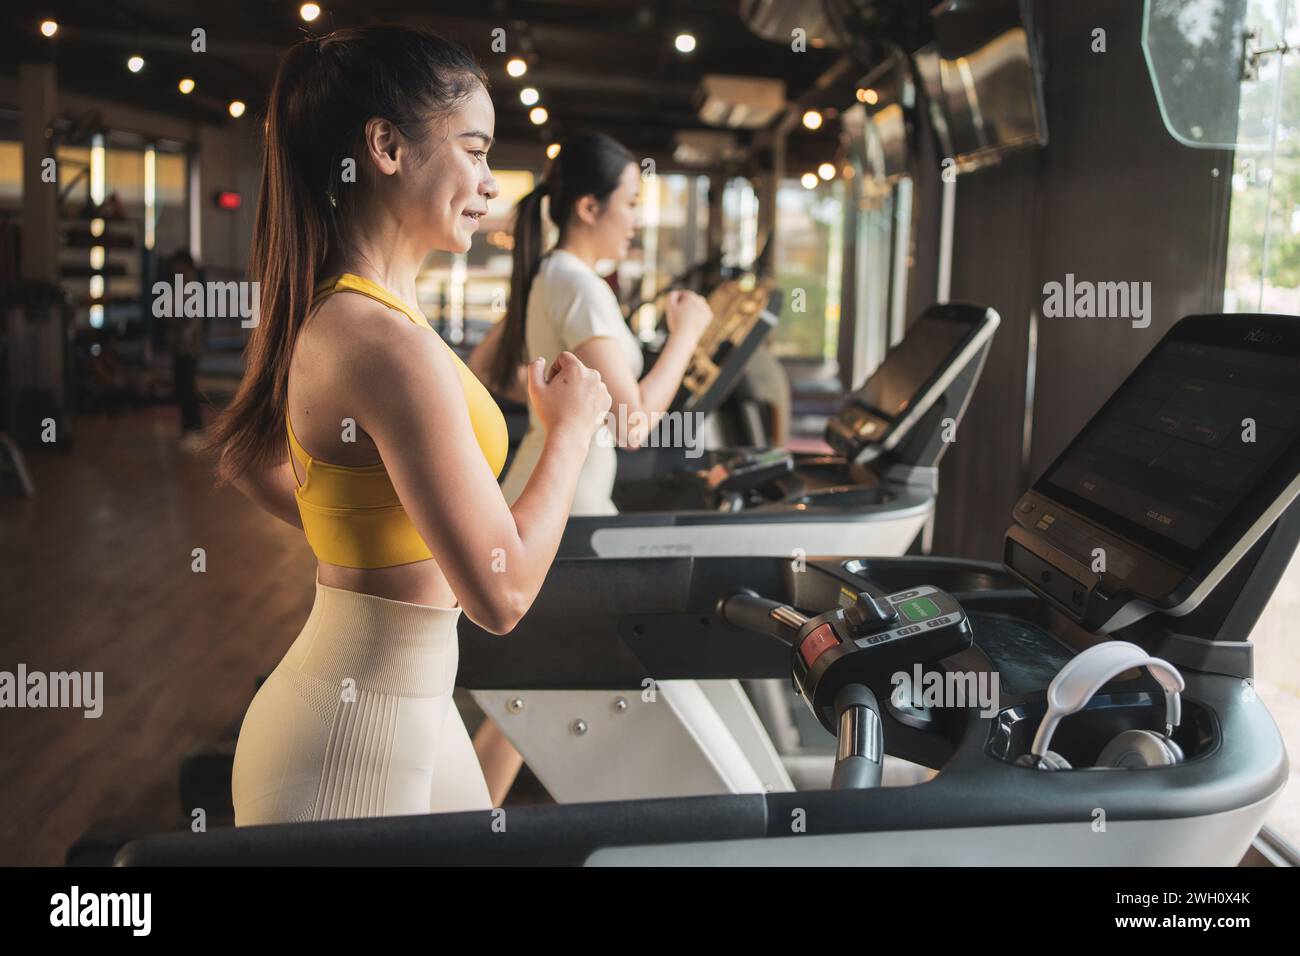 Two young woman are jogging on treadmill during her sports training in a gym. Stock Photo